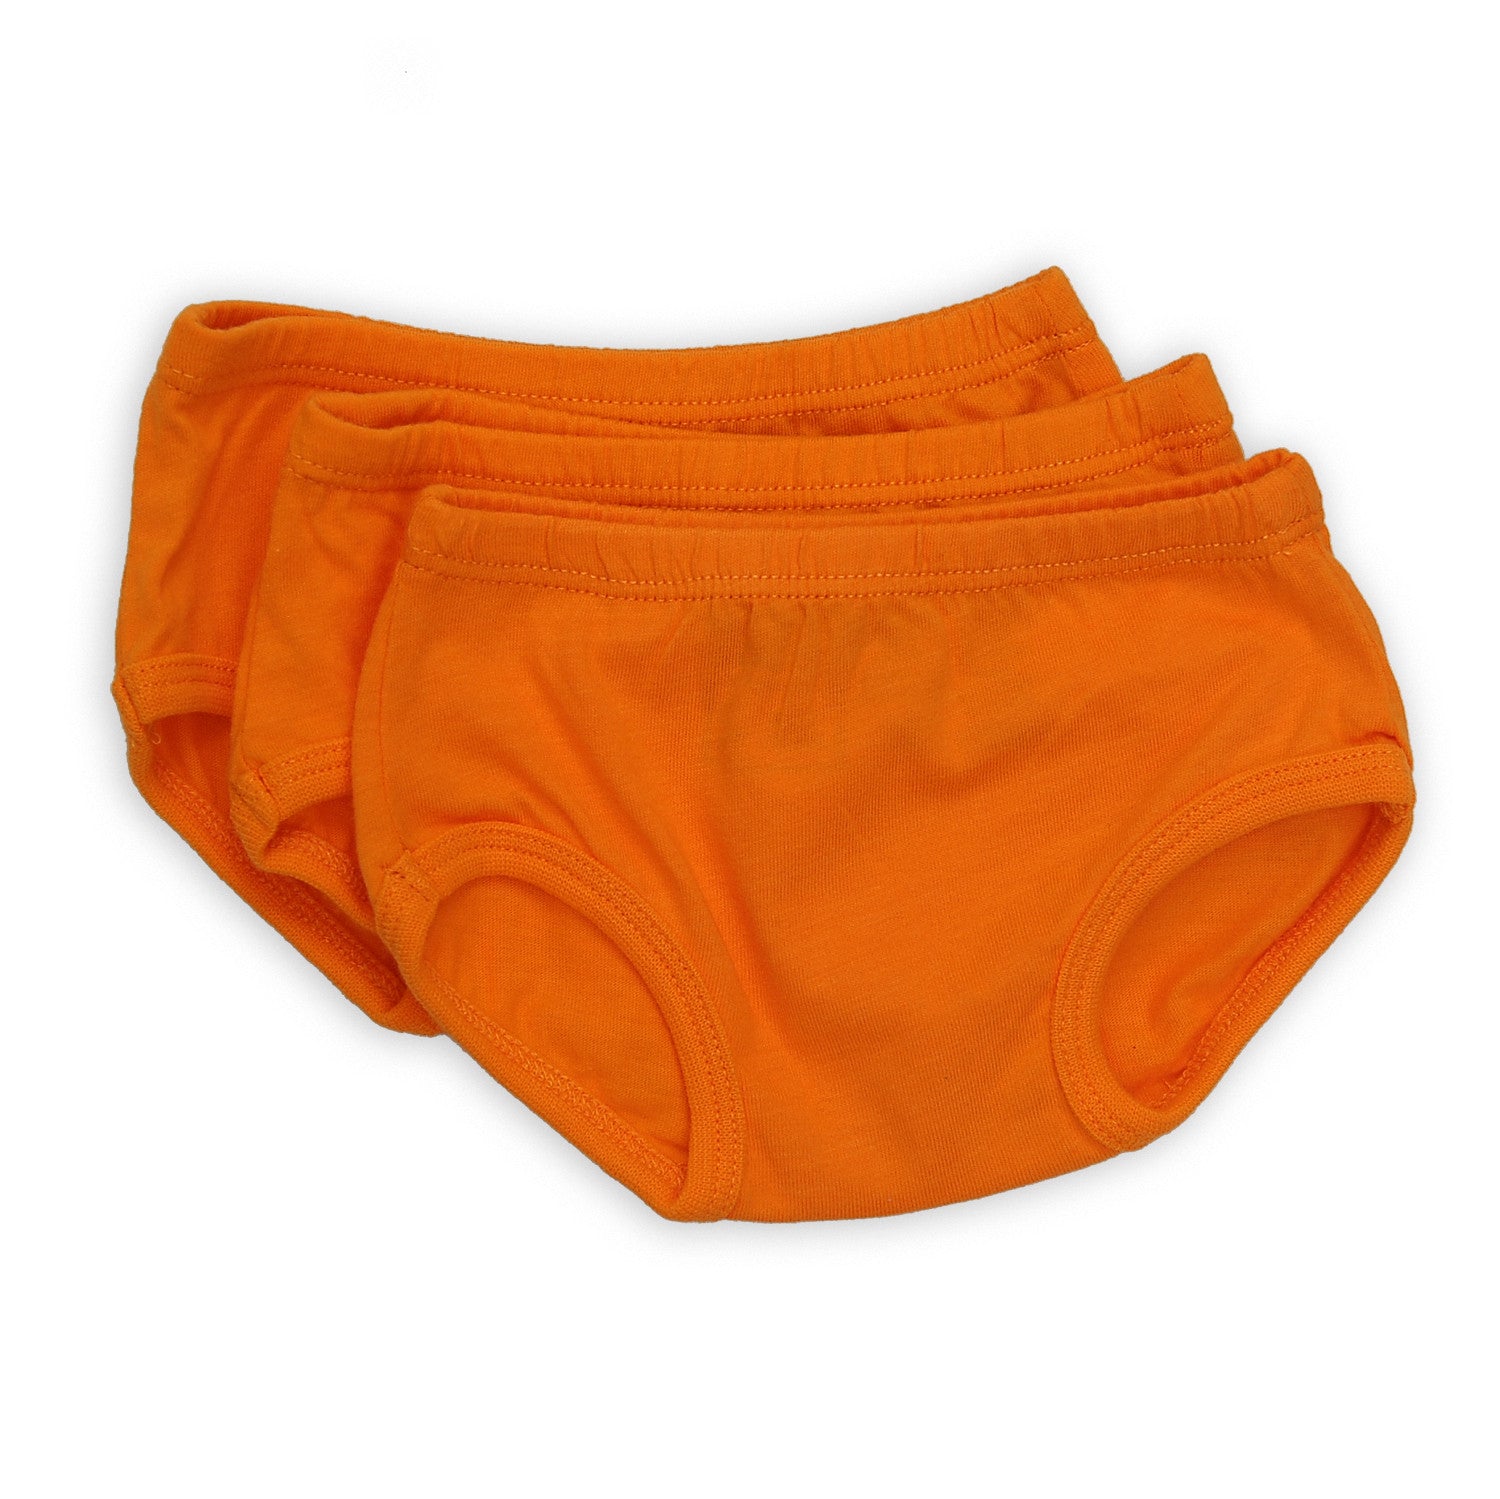 CLEARANCE Tiny Undies small baby underwear, 3-pack